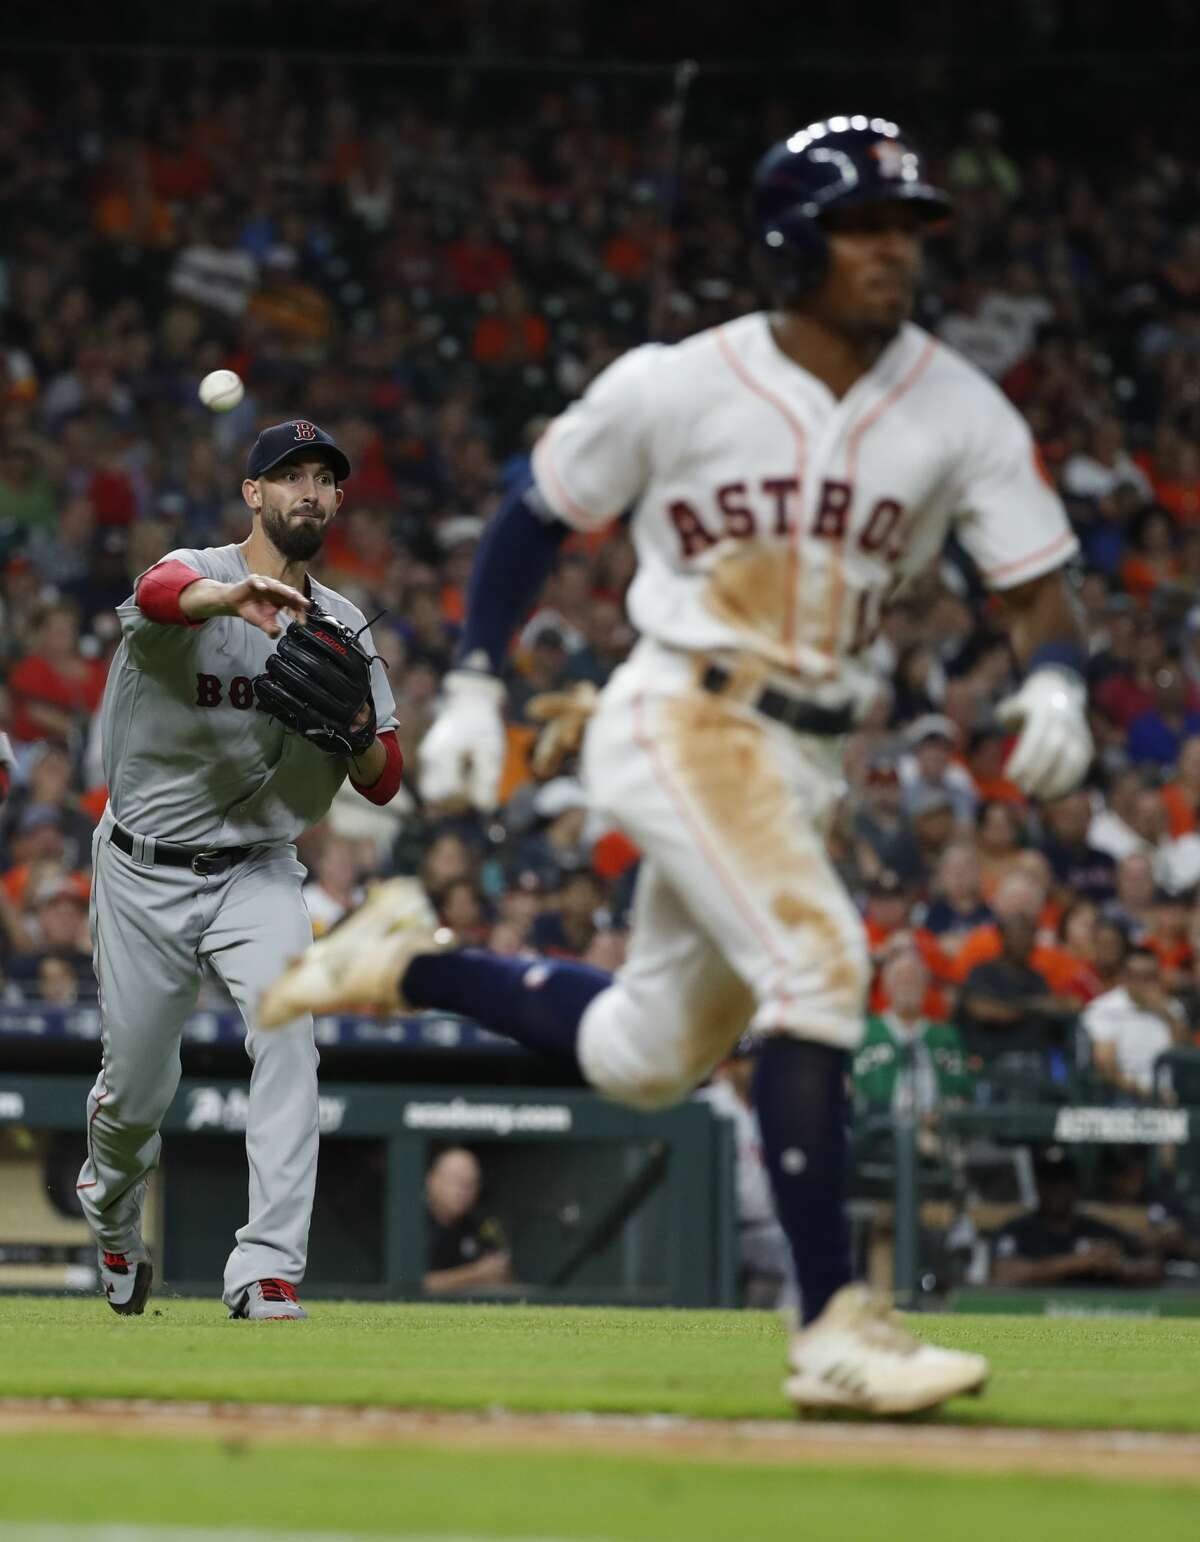 Boston Red Sox starting pitcher Rick Porcello (22) makes the throw to first base as Houston Astros Tony Kemp (18) hit into a sac bunt during the fifth inning of an MLB baseball game at Minute Maid Park, Sunday June 3, 2018, in Houston. ( Karen Warren / Houston Chronicle )